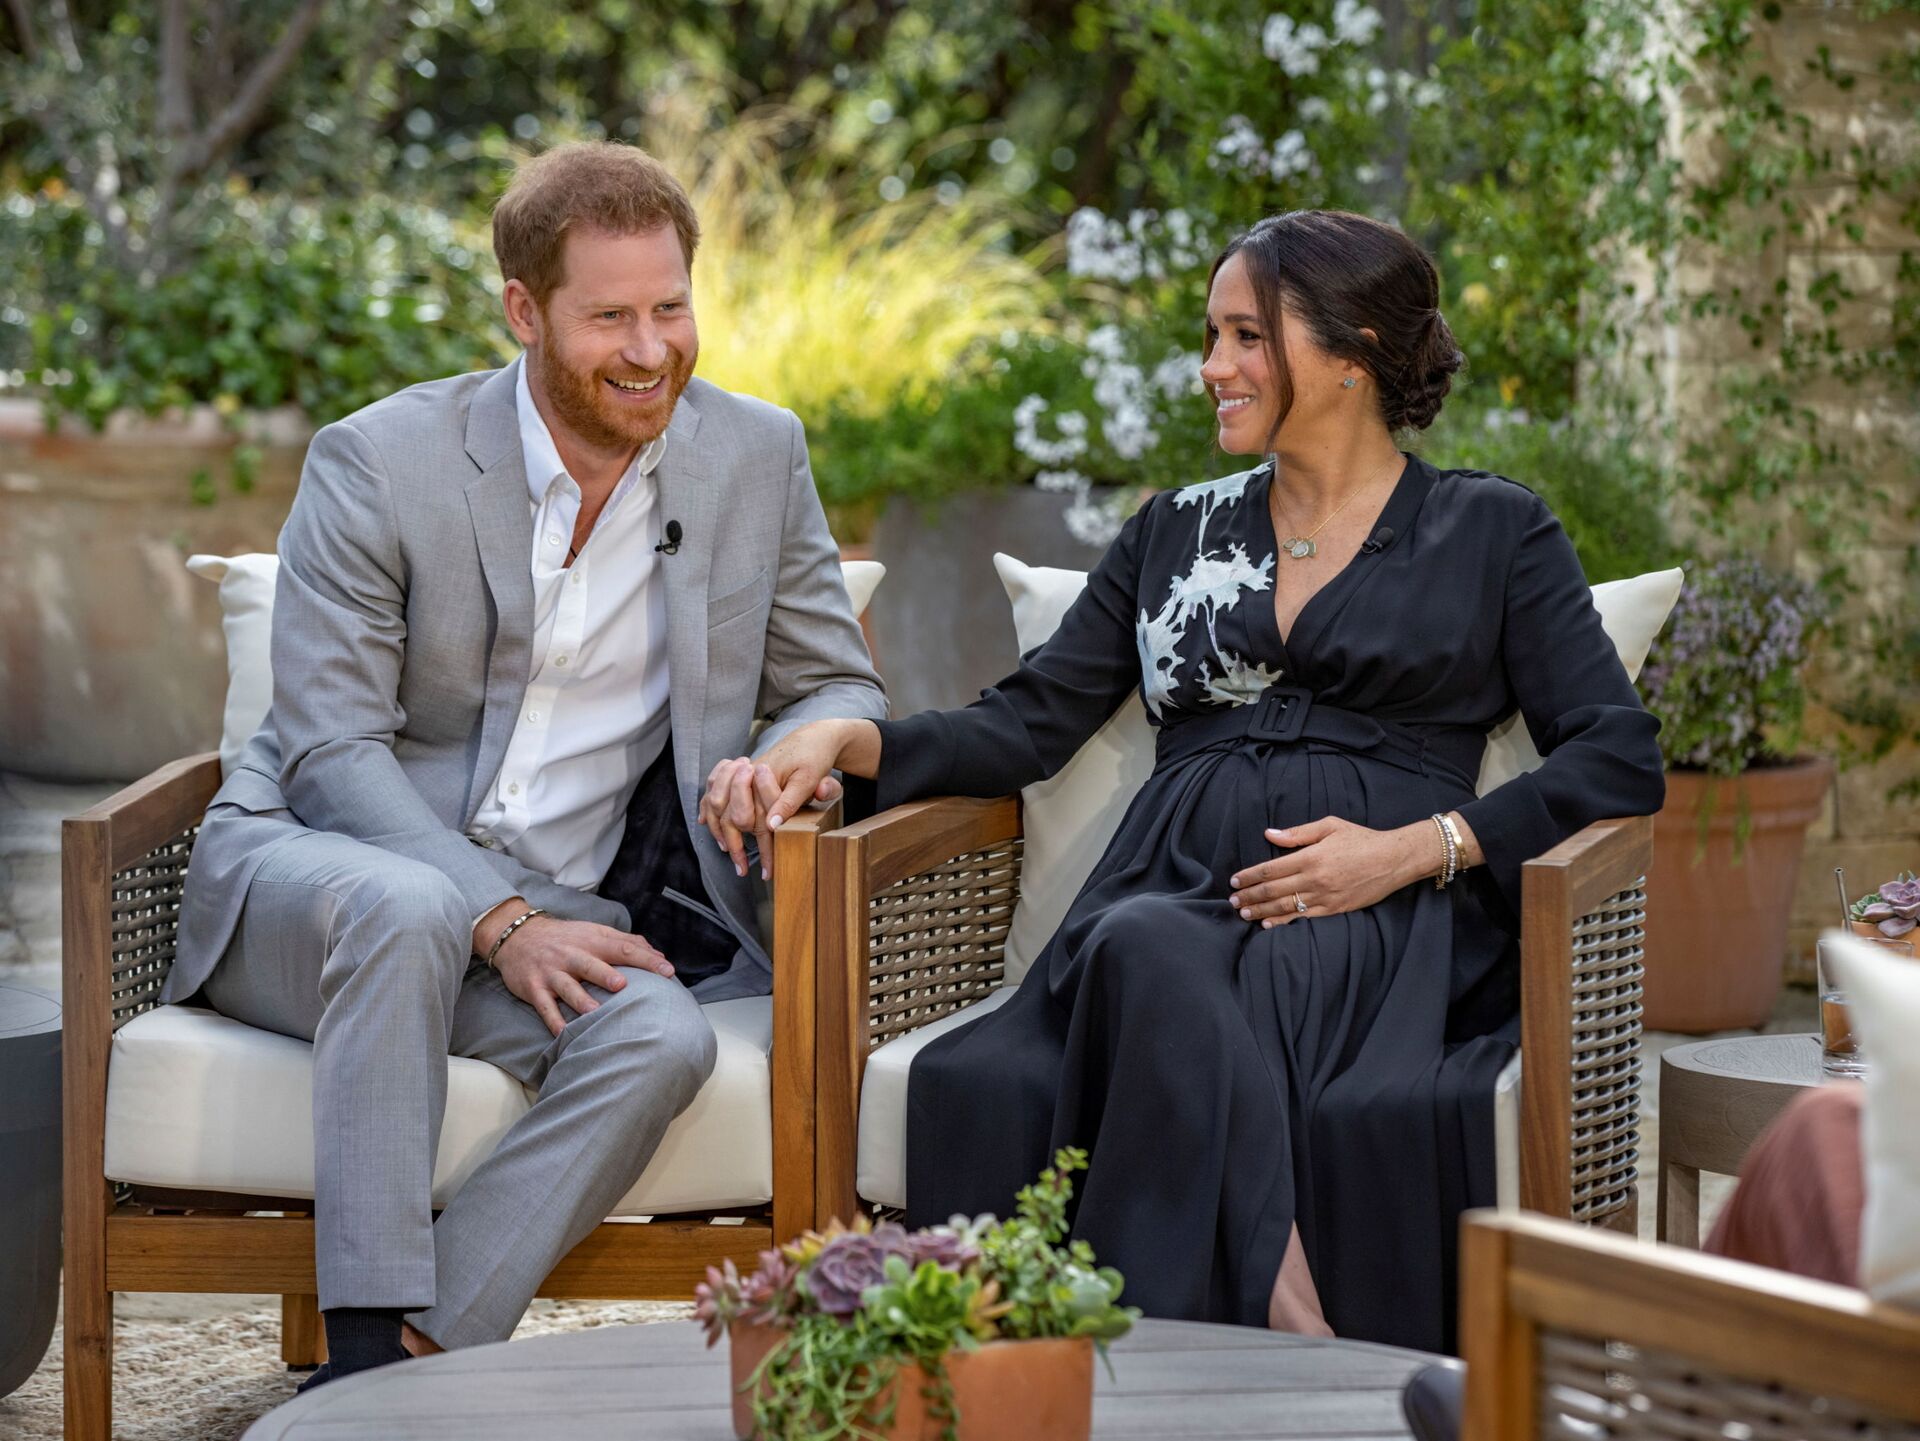 'Power of Broadcast TV': Report Reveals How Oprah Landed Interview With Duke and Duchess of Sussex - Sputnik International, 1920, 11.03.2021